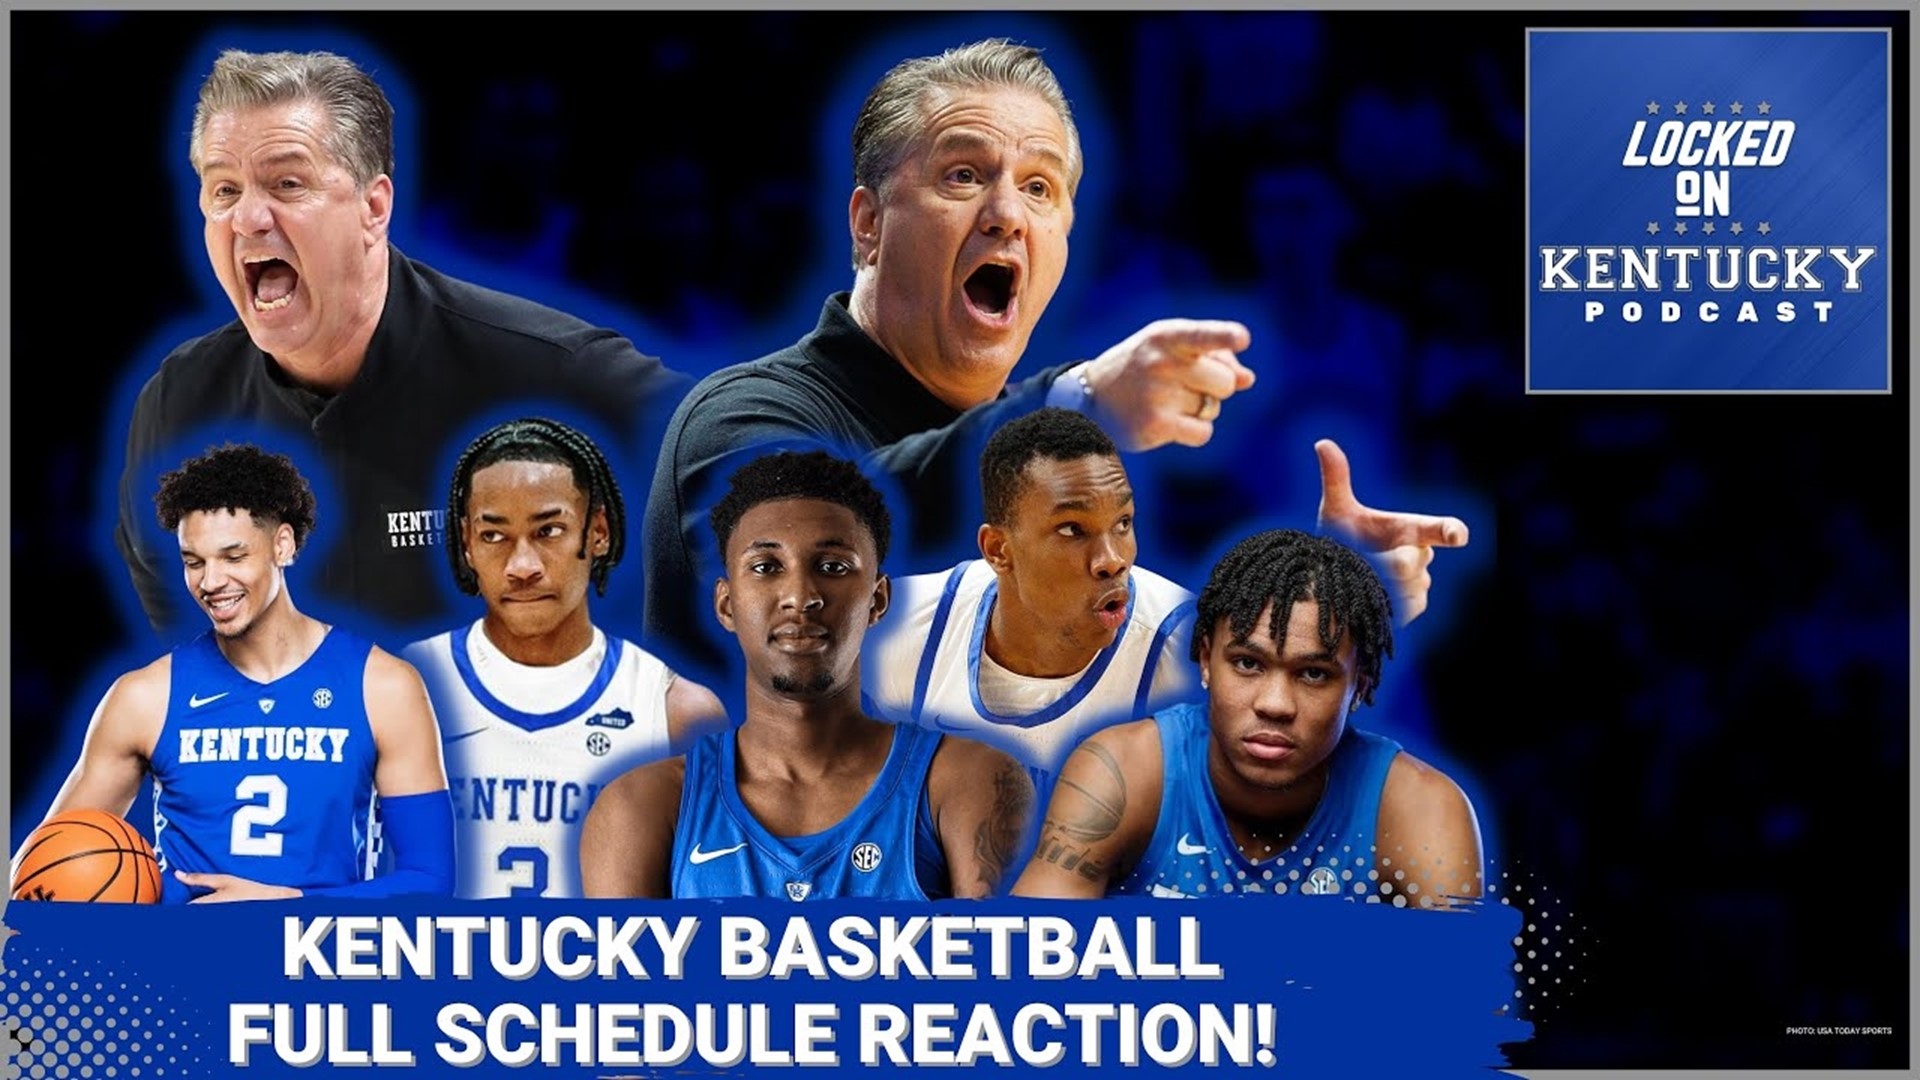 Kentucky basketball's 2023-24 schedule is here. It's tough, but if all goes well for John Calipari's squad, the Wildcats could have a special year.